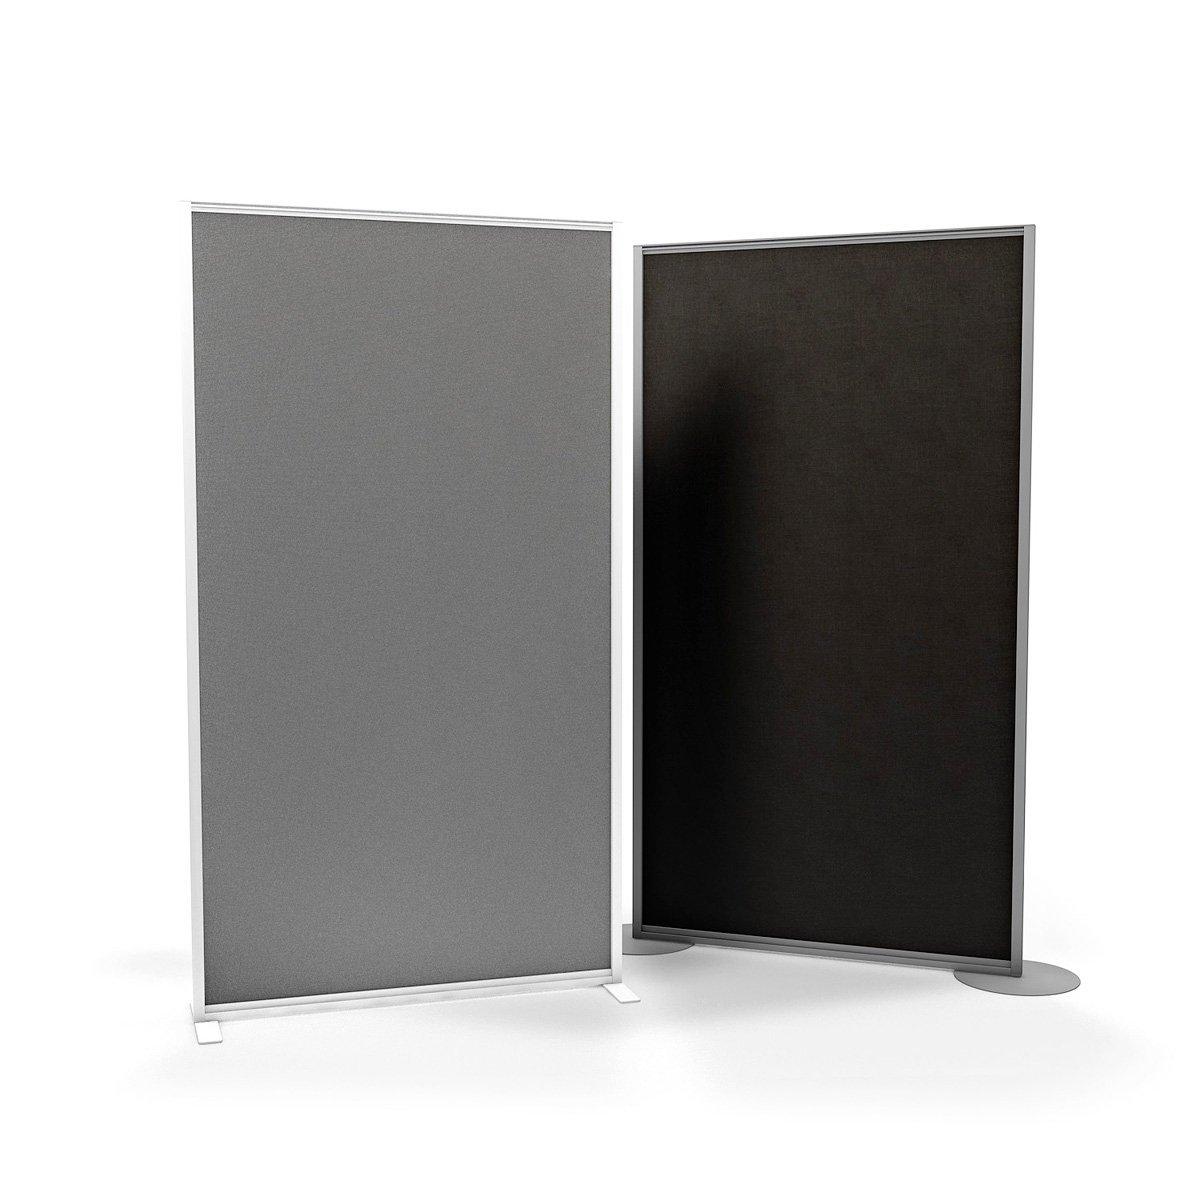 FRONTIER® Acoustic Panel Screens Freestanding Partitions